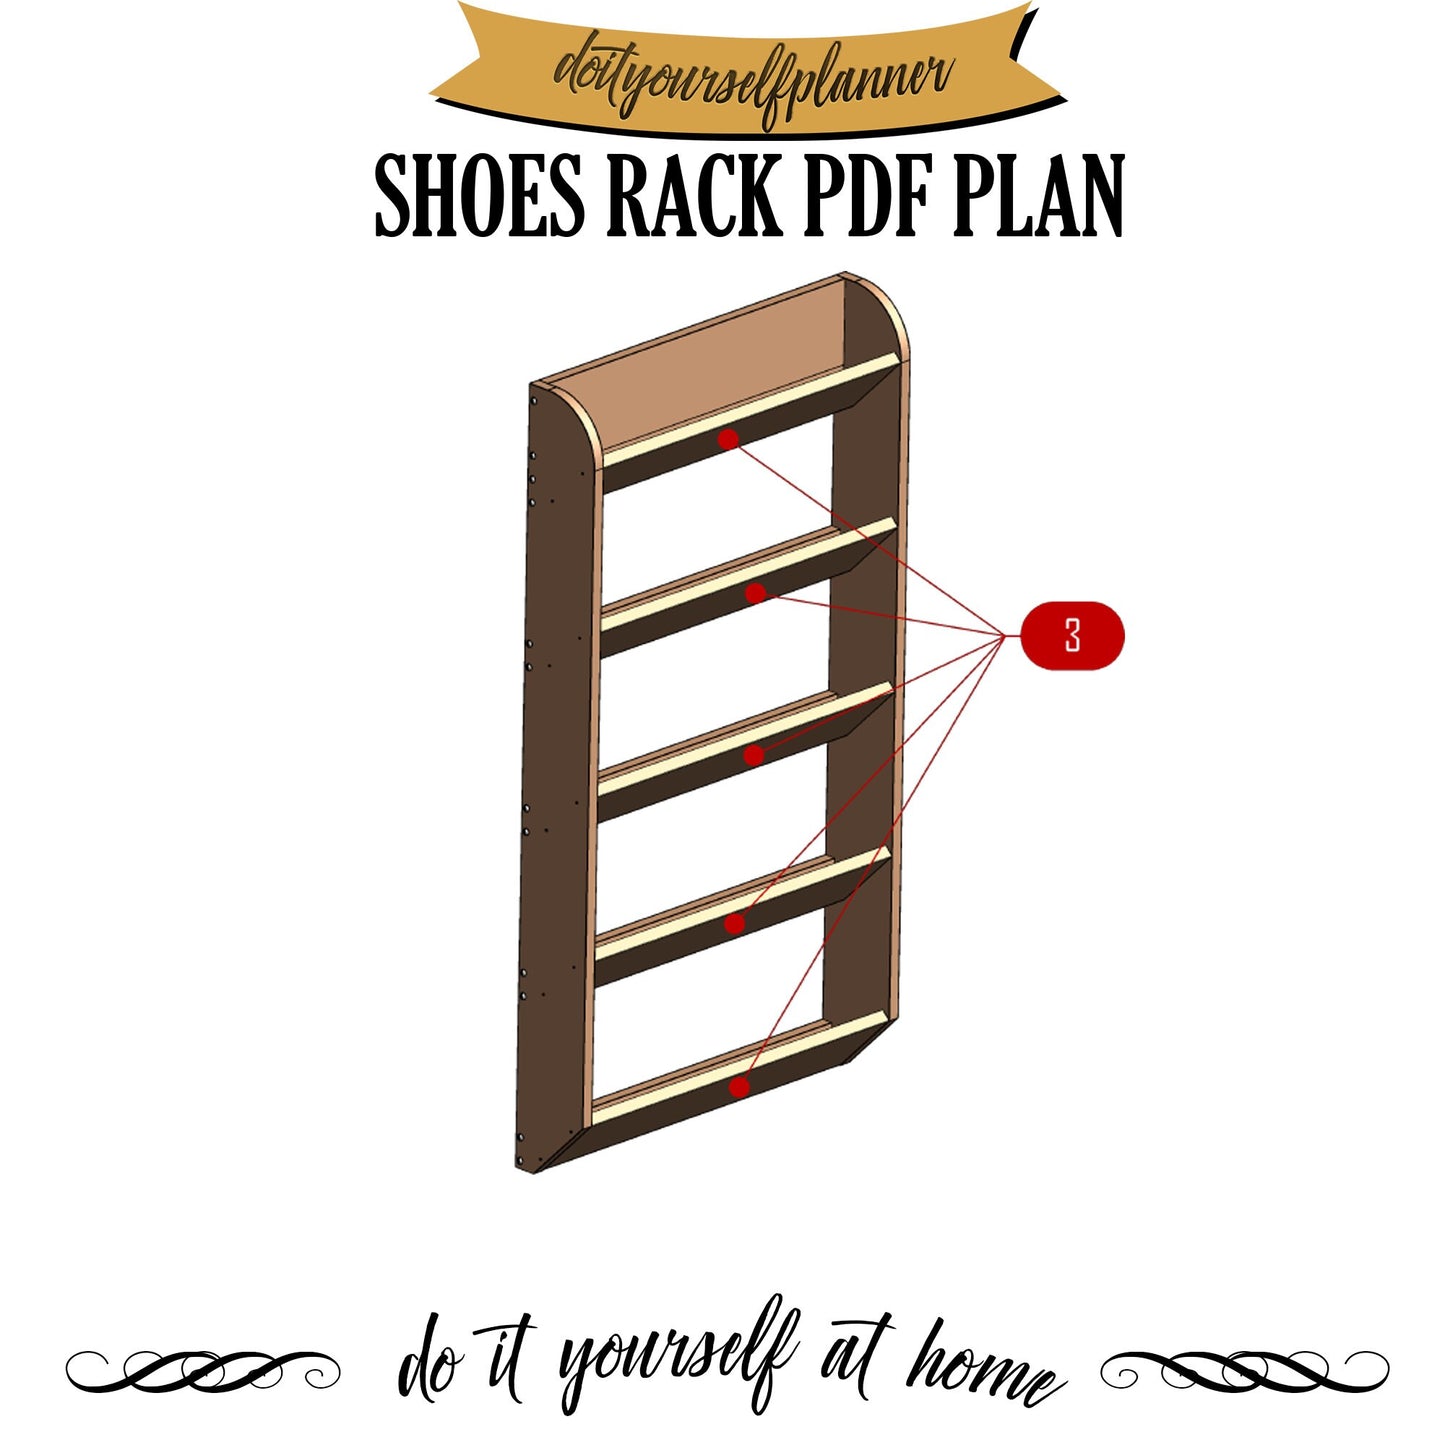 Wall mount shoes storage rack-wall shoes storage plans-shoe storage plan-wood shelf plan-storage rack plan-wall mount rack-shoes shelf plan